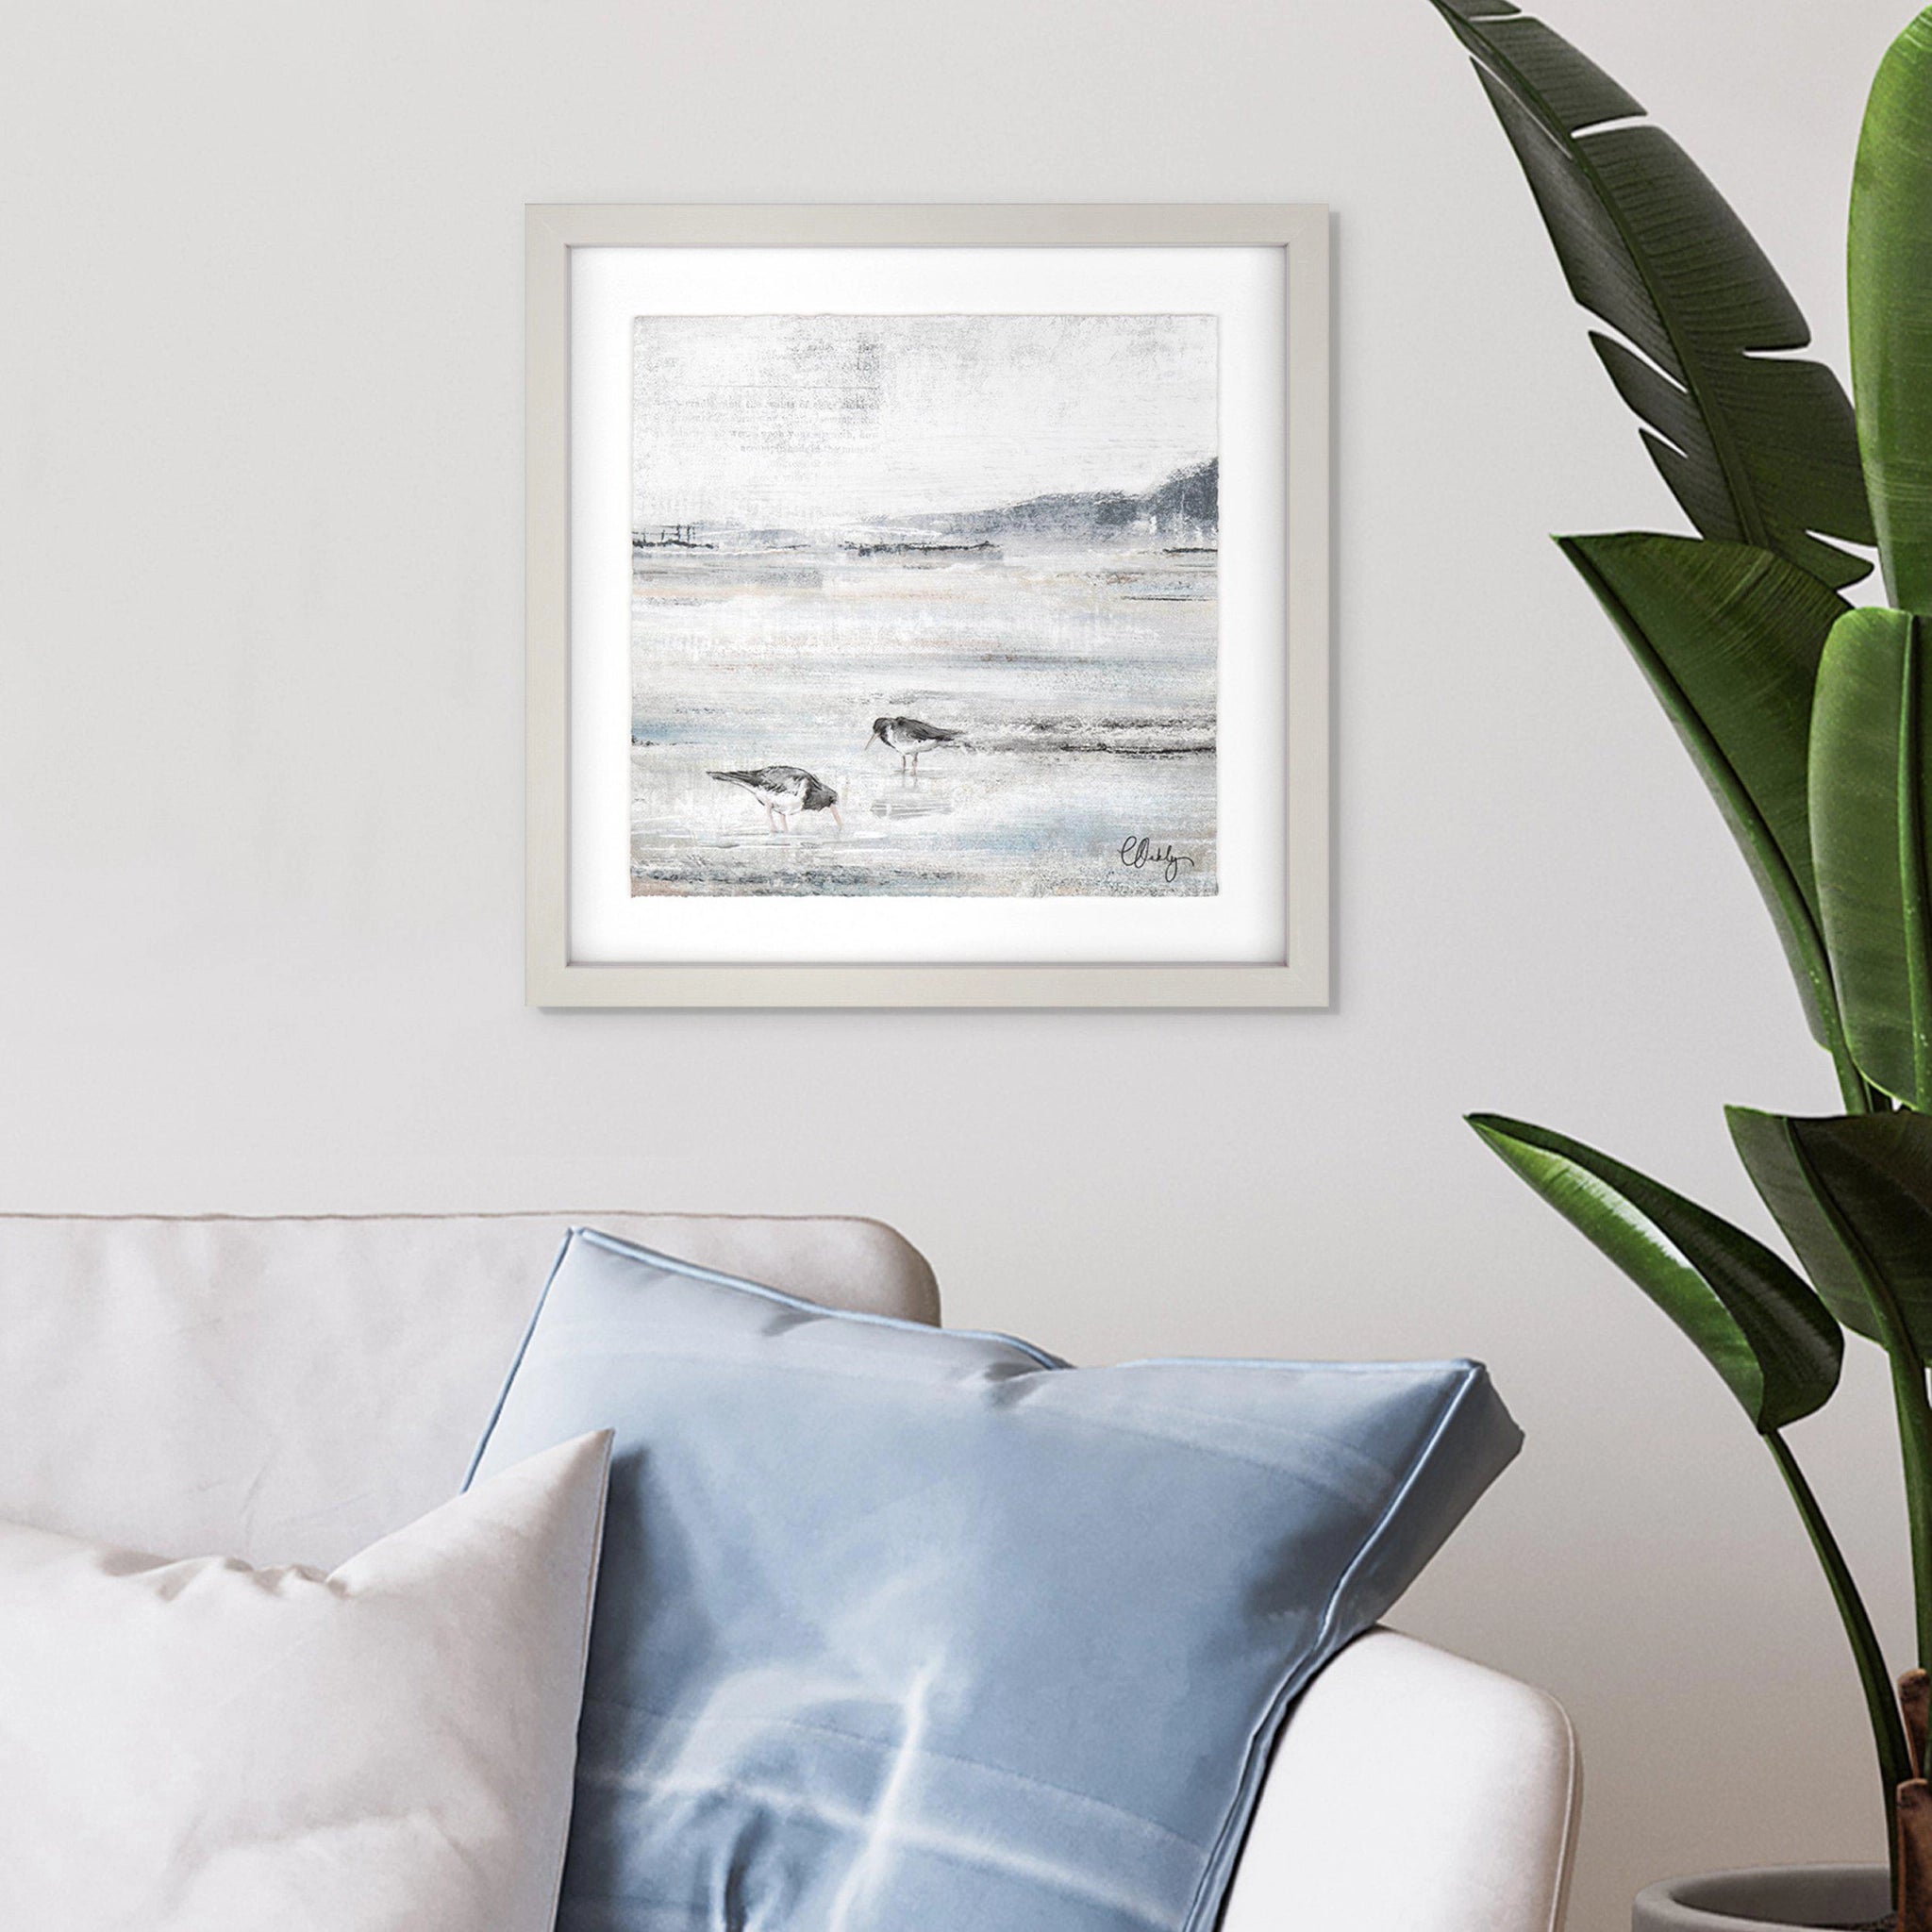 Framed print of oyster catcher birds on a sandy beach at low tide in wispy greys and blues hanging in a light room.